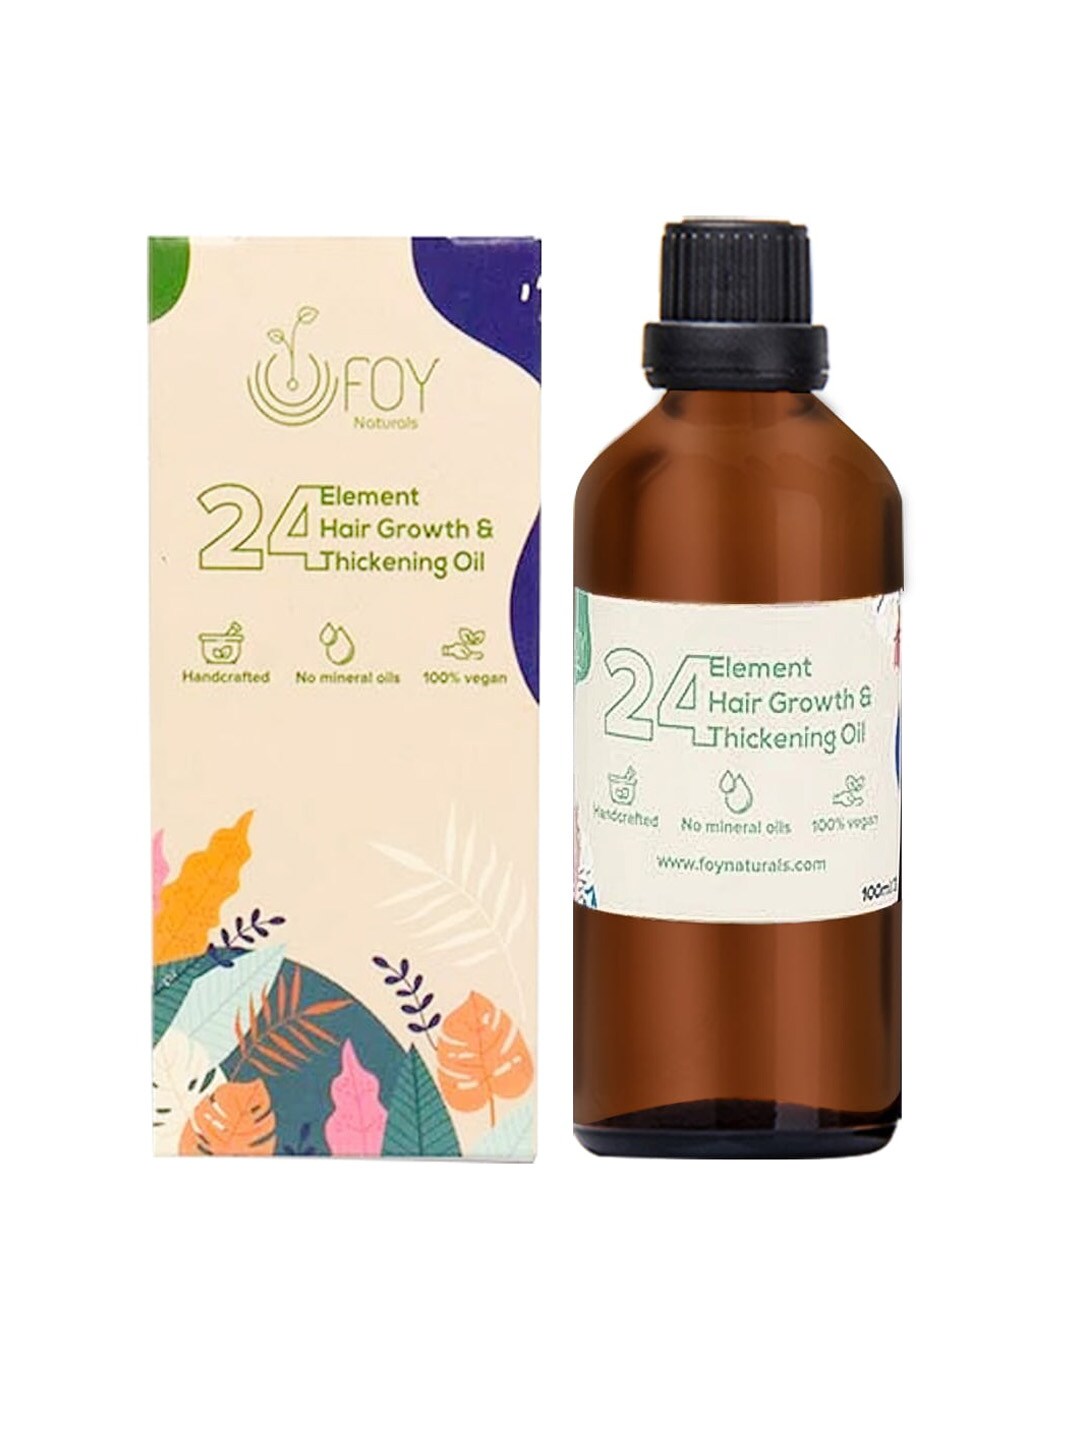 FOY Naturals 24 Element Hair Growth & Thickening Oil 100 ml Price in India